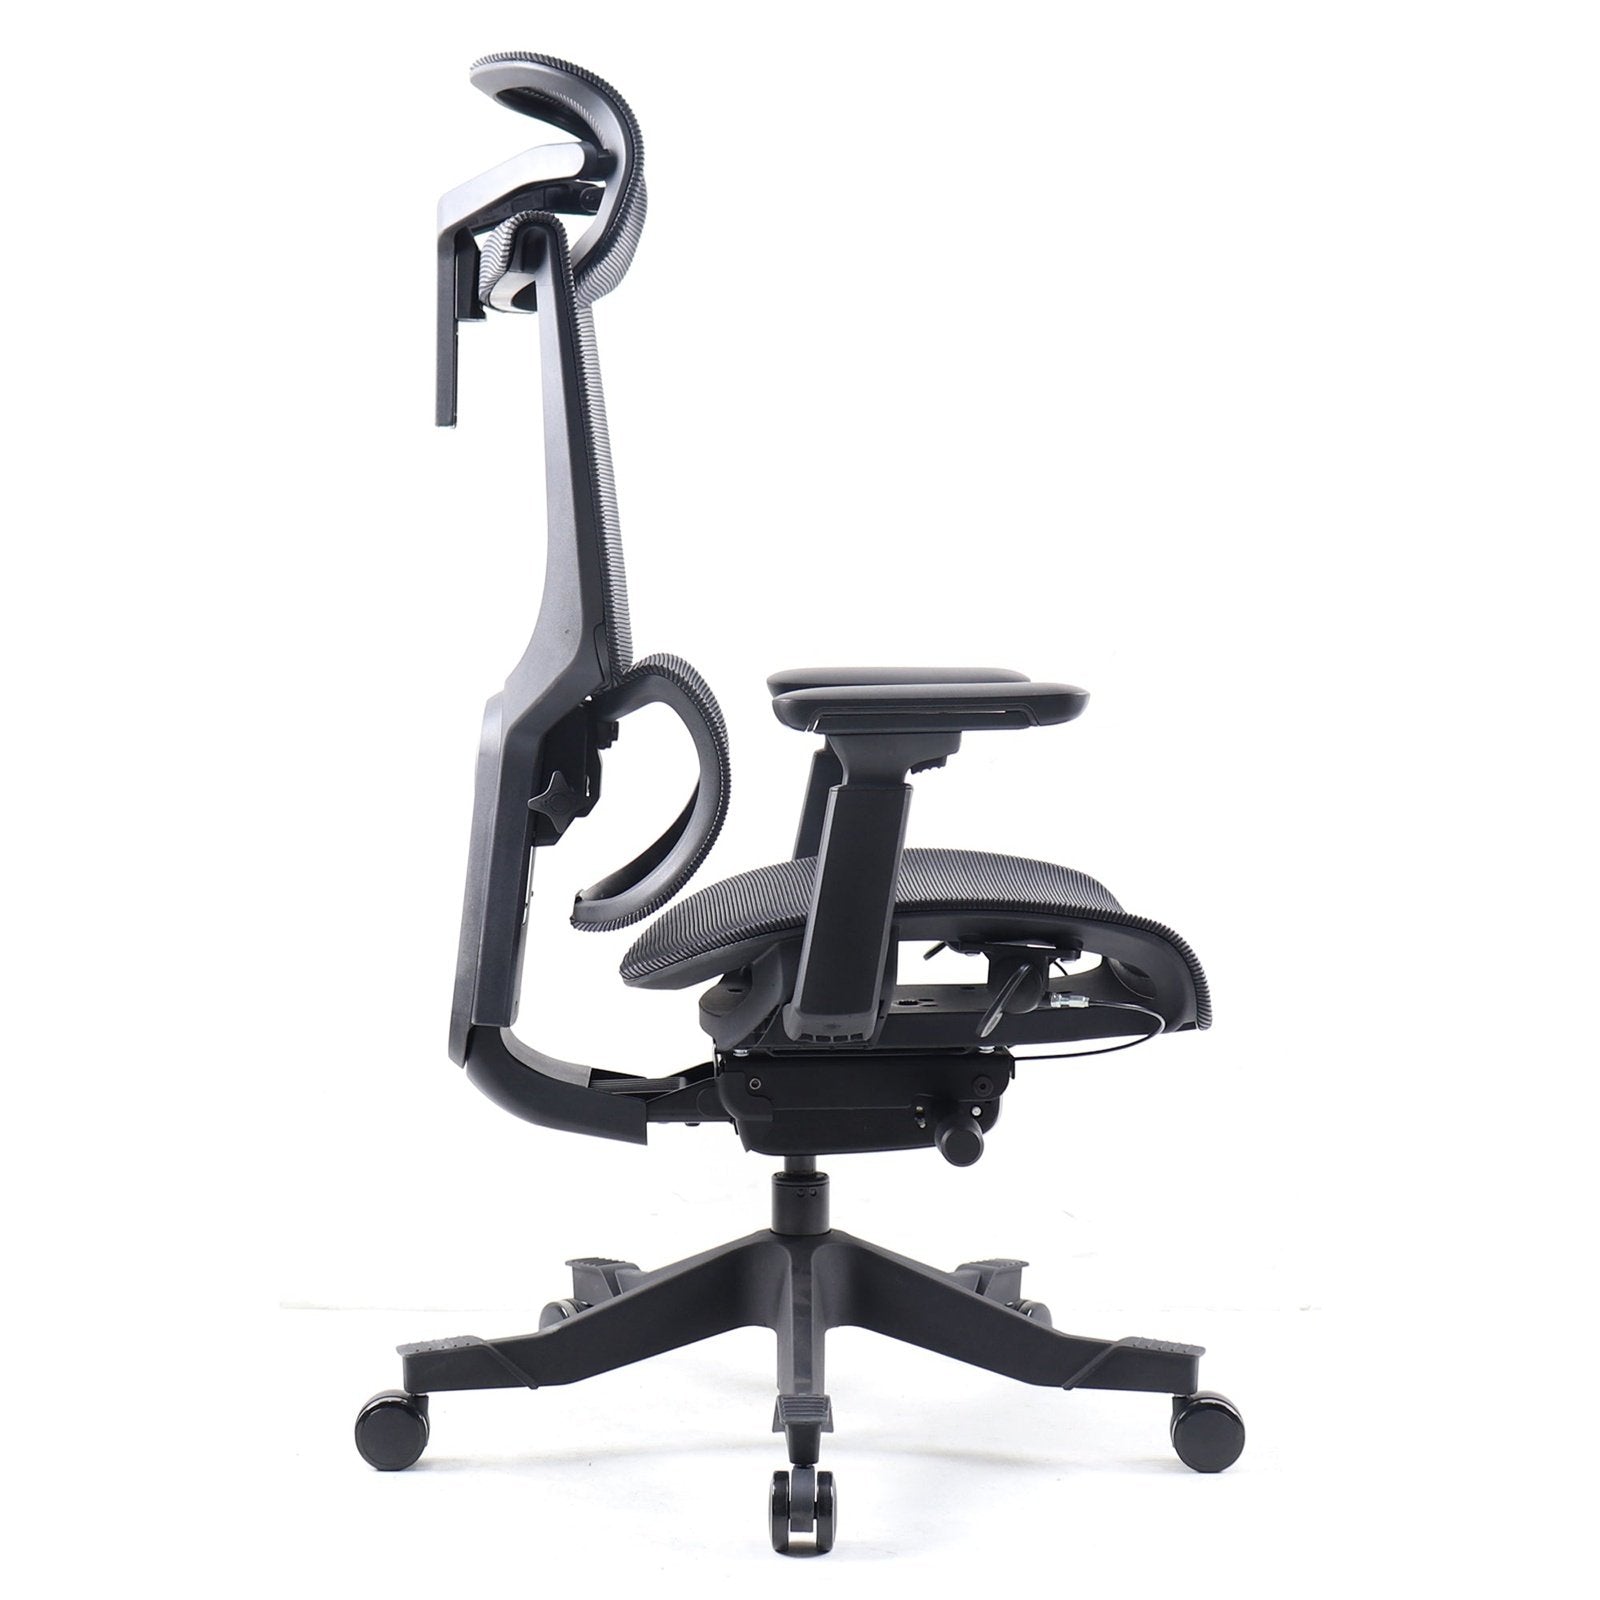 Elise back operator chair with headrest and black mesh seat - Office Products Online